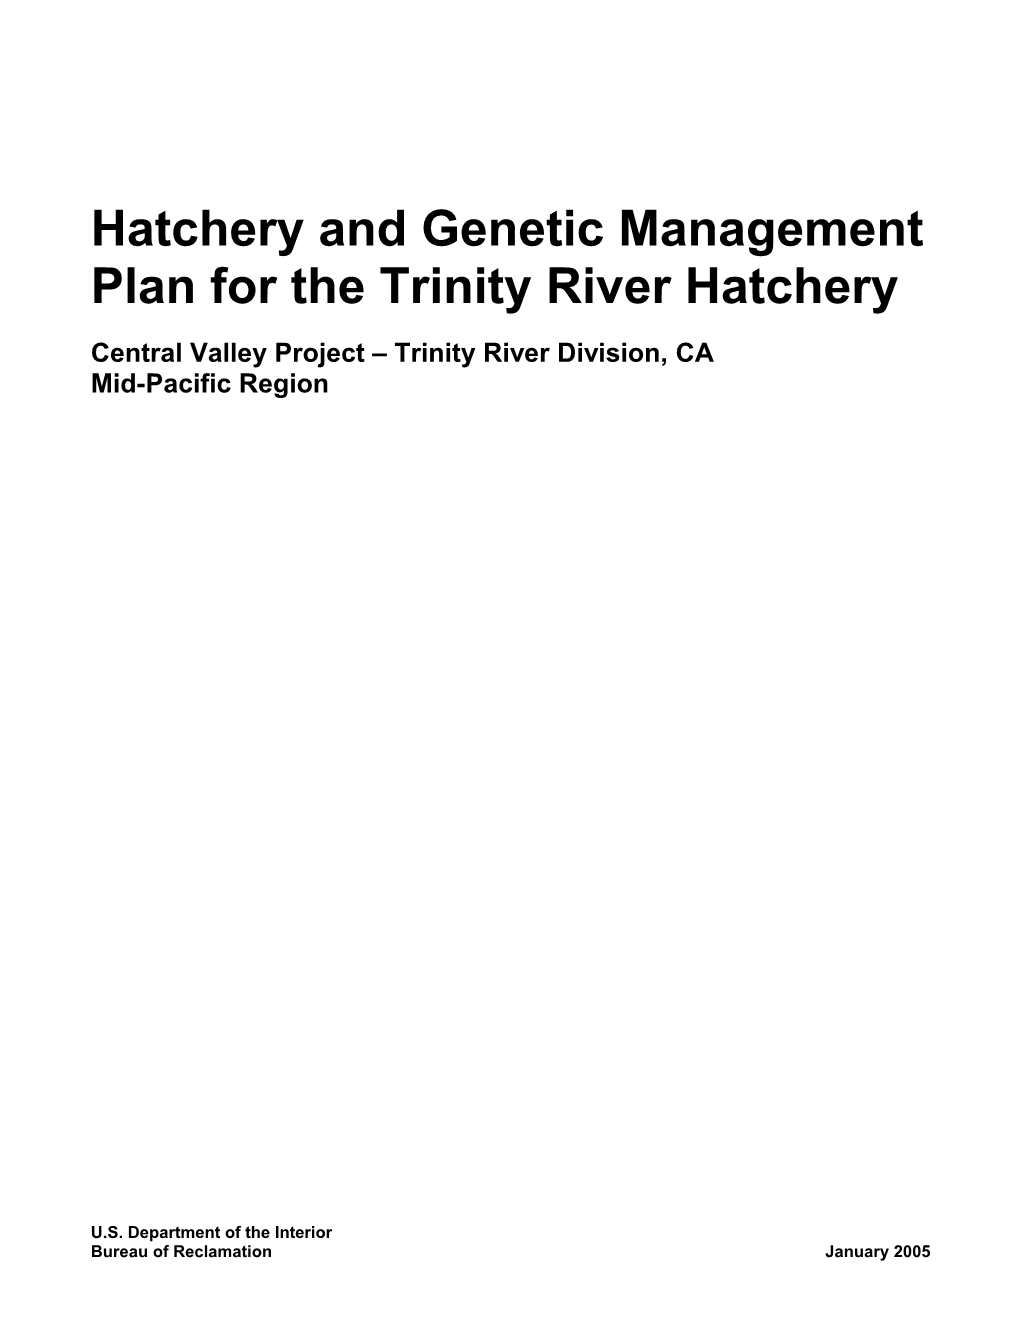 Hatchery and Genetic Management Plan for the Trinity River Hatchery